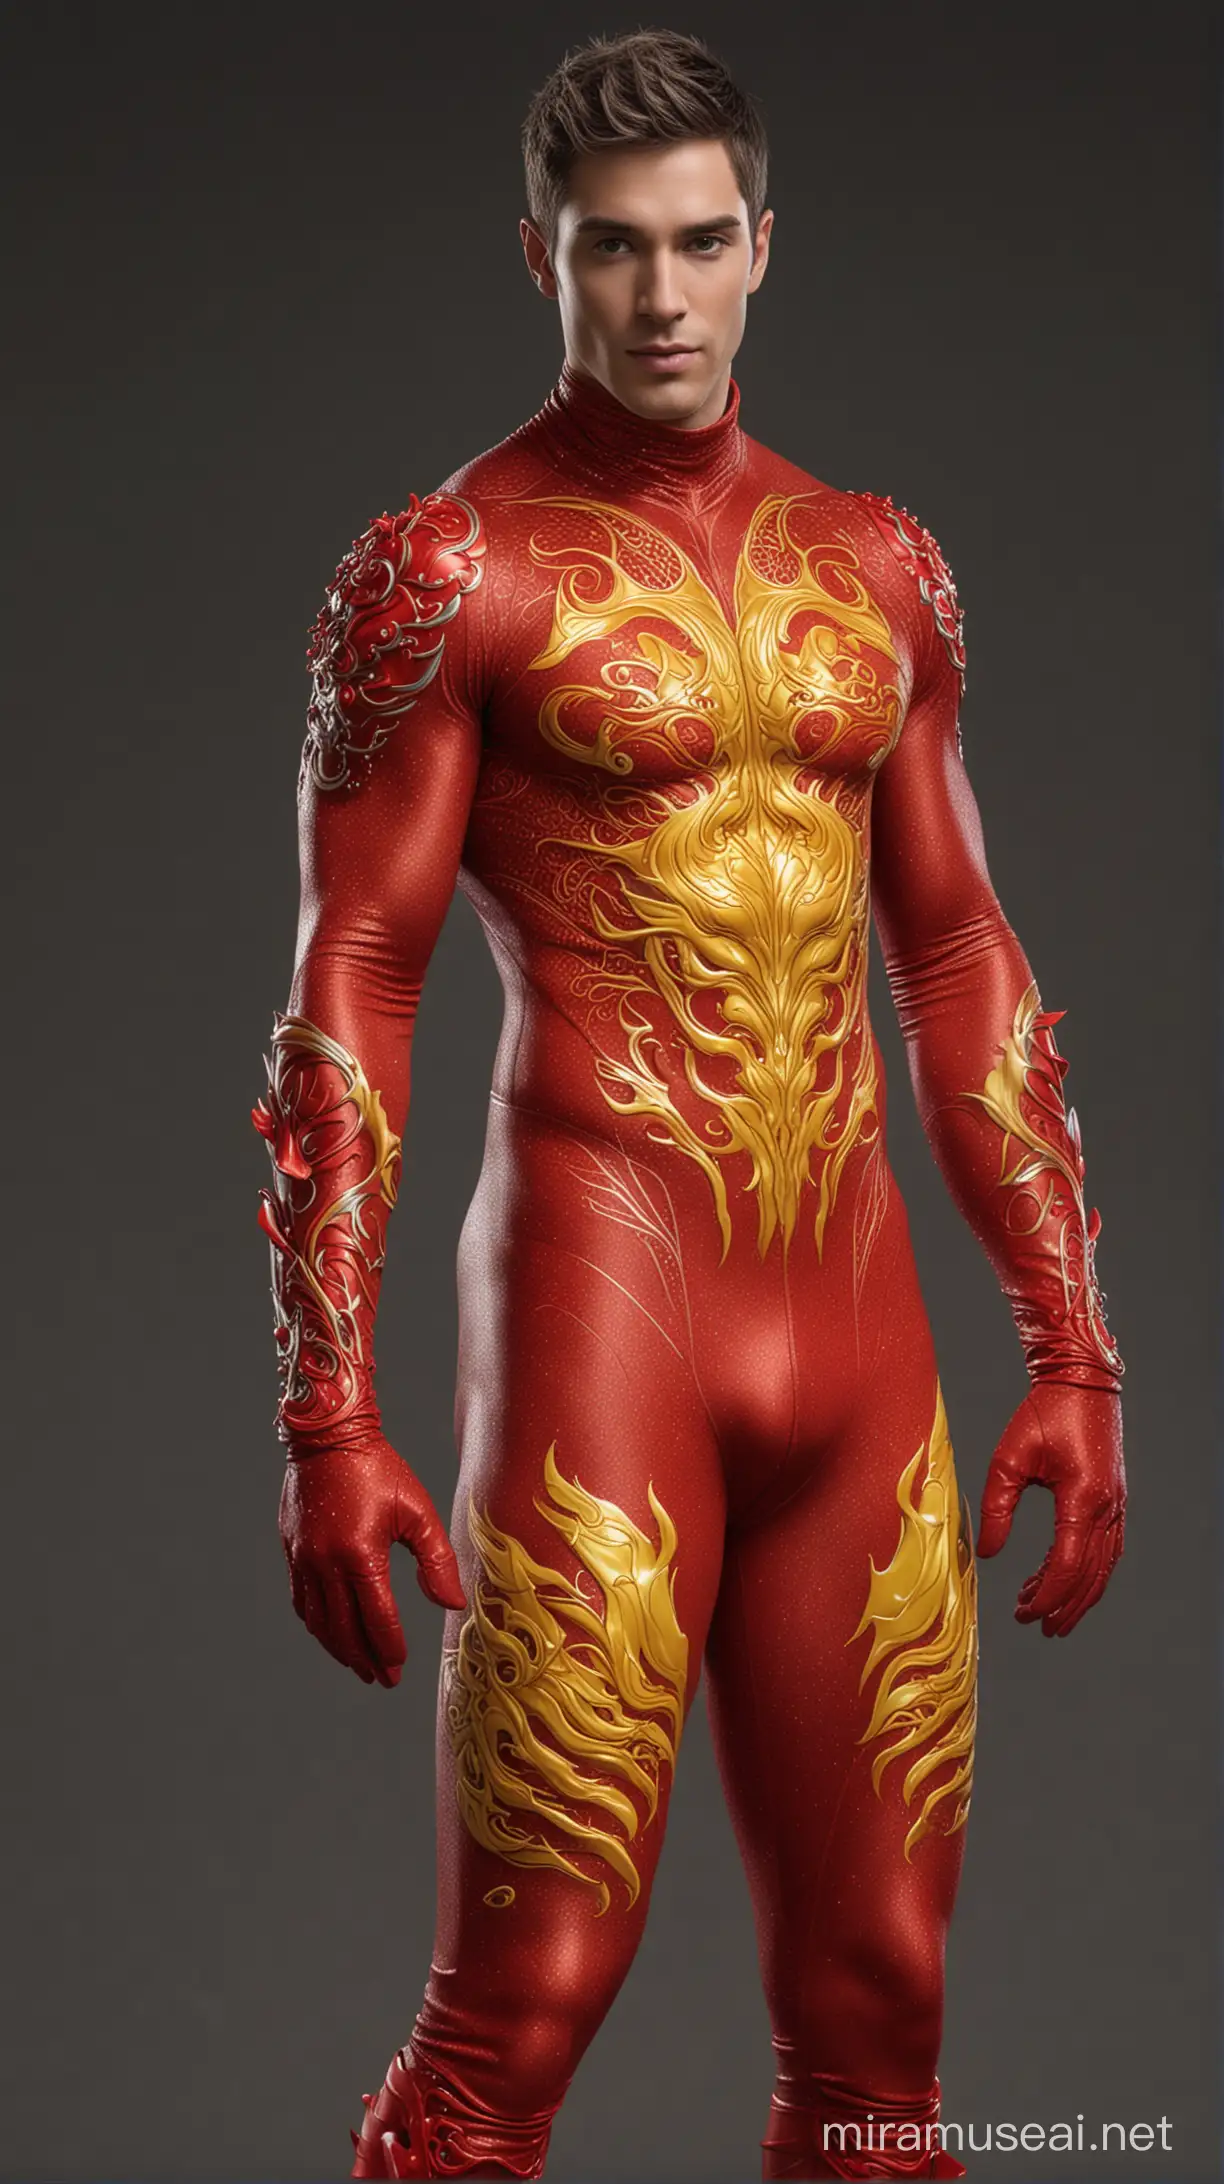  Full full body photorealistic ultra realism high definition aesthetic stabilized diffusion picture of handsome hunky fractal clean shaven  Zayne as celestial mock, wearing red and yellow dragon sparkling biomorphic transparent overall tight fit spandex and gloves..